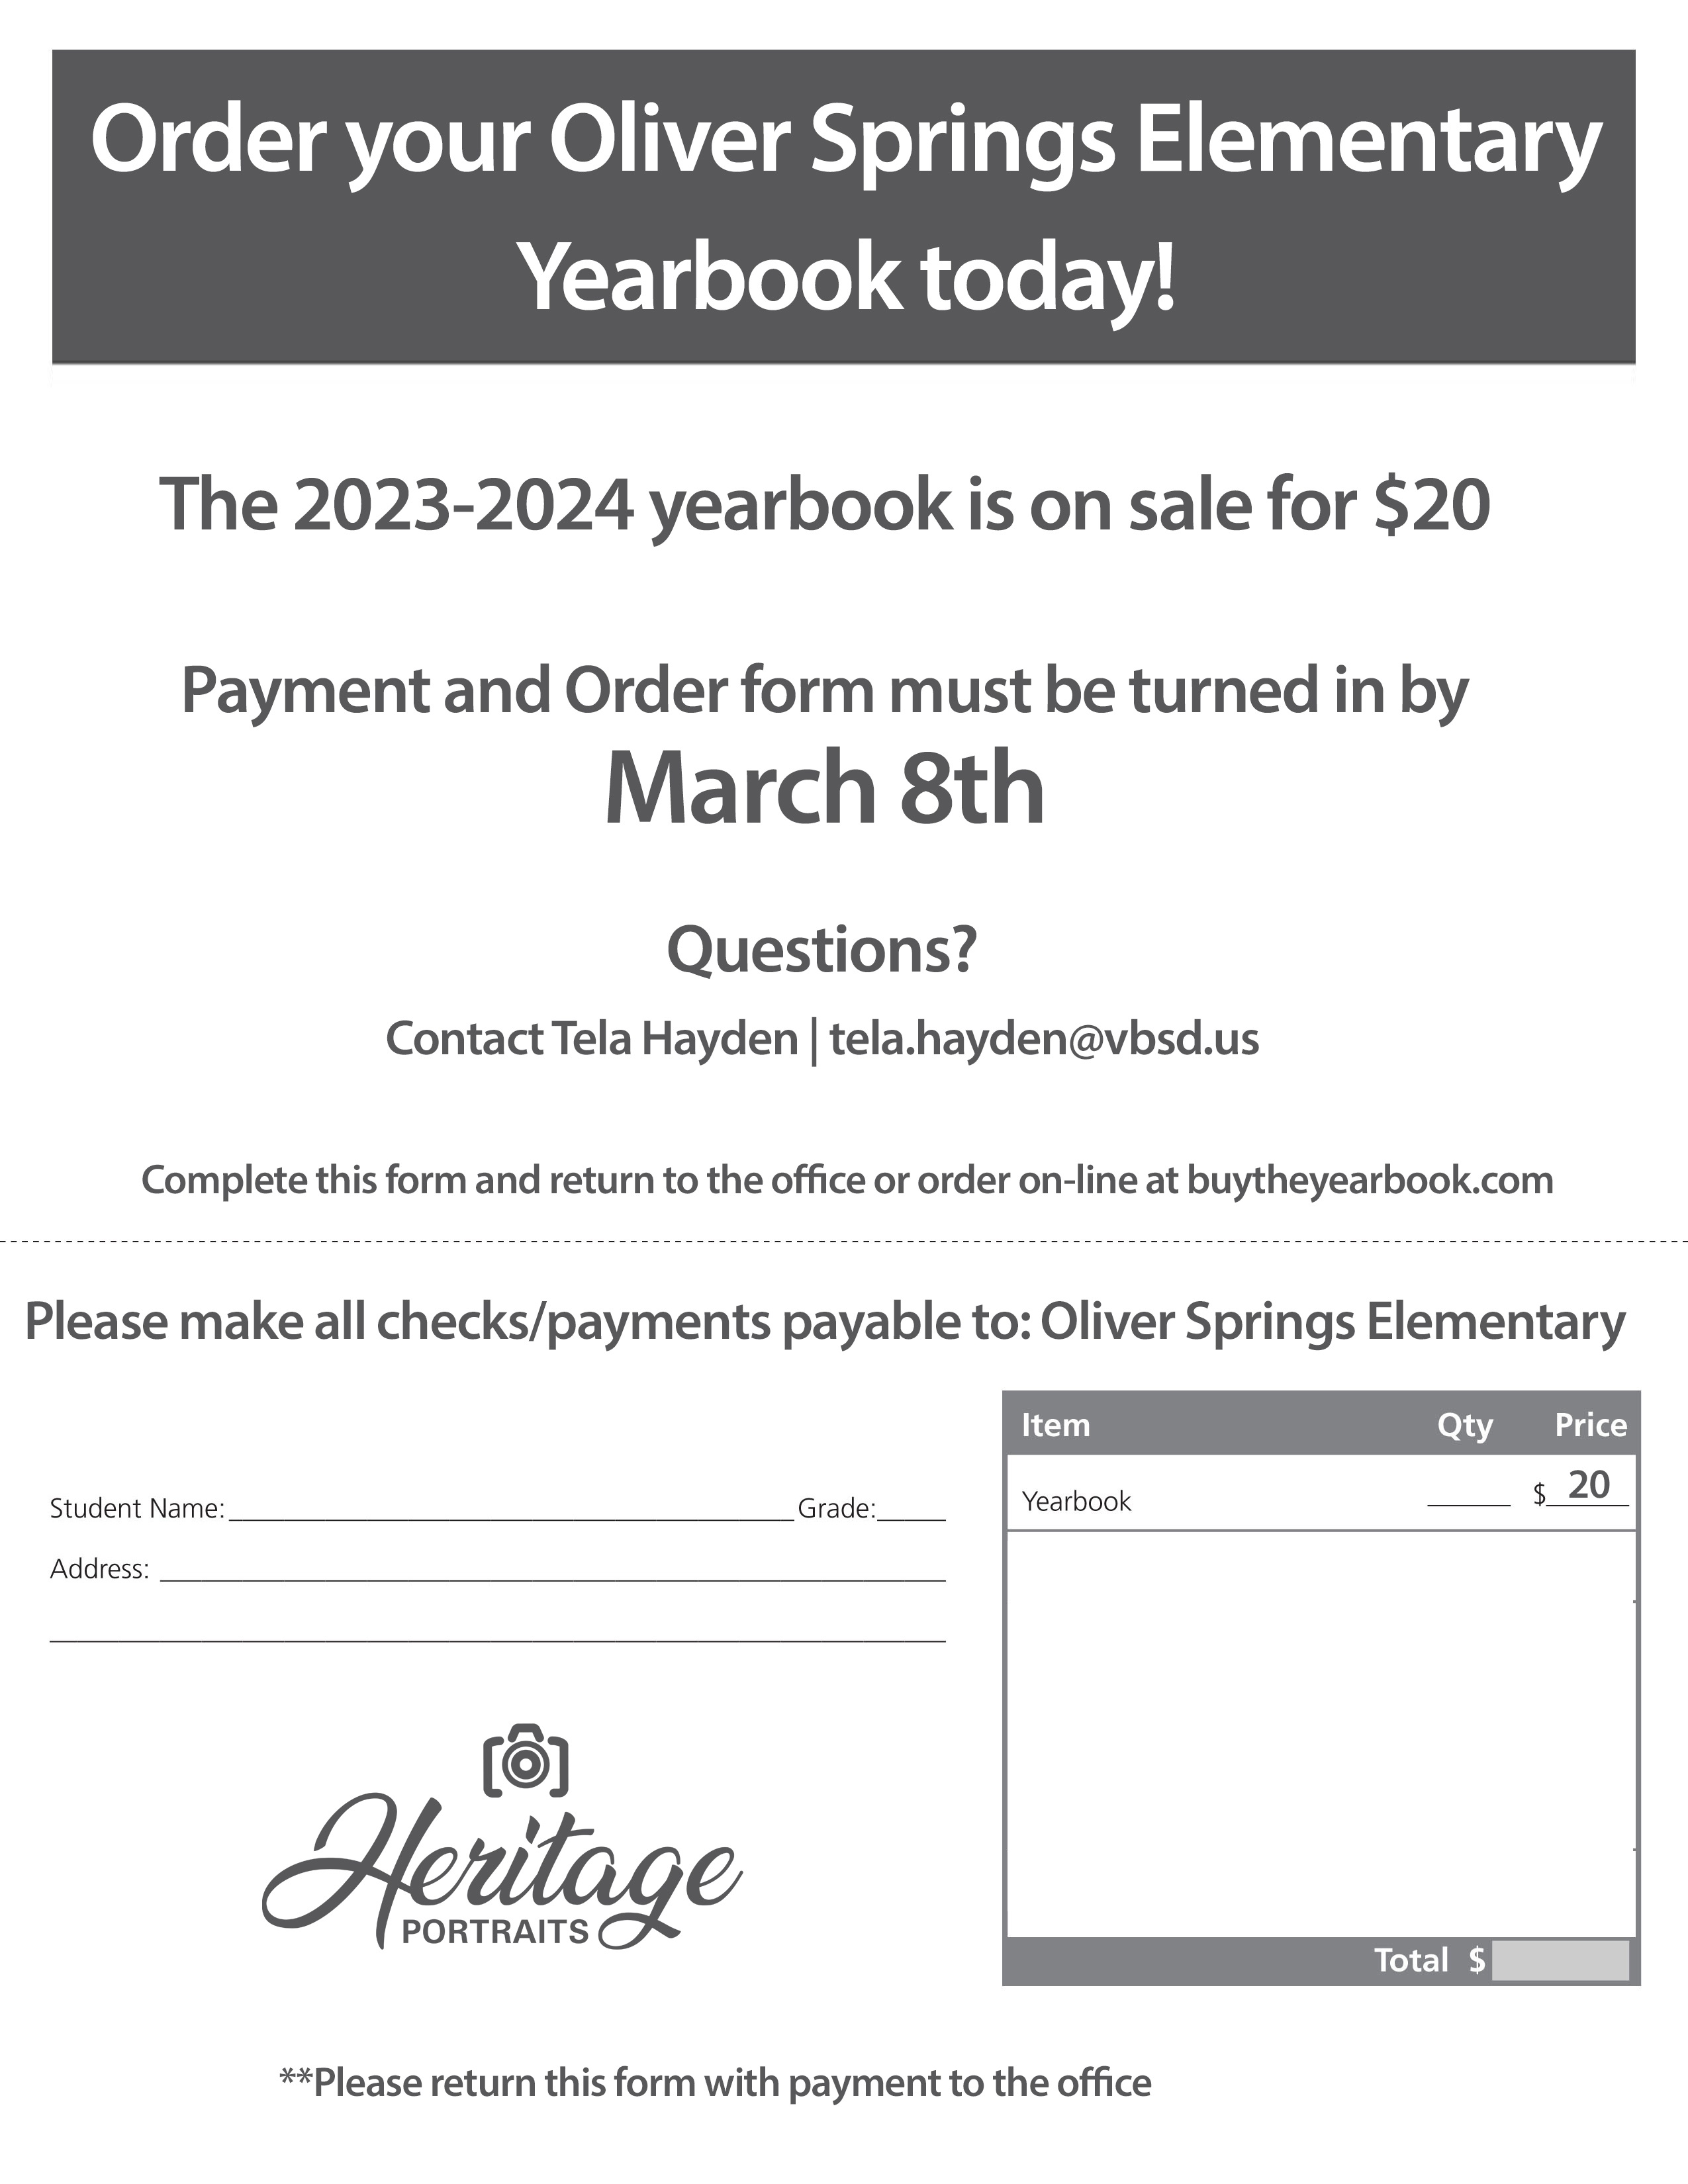 Order a yearbook! 